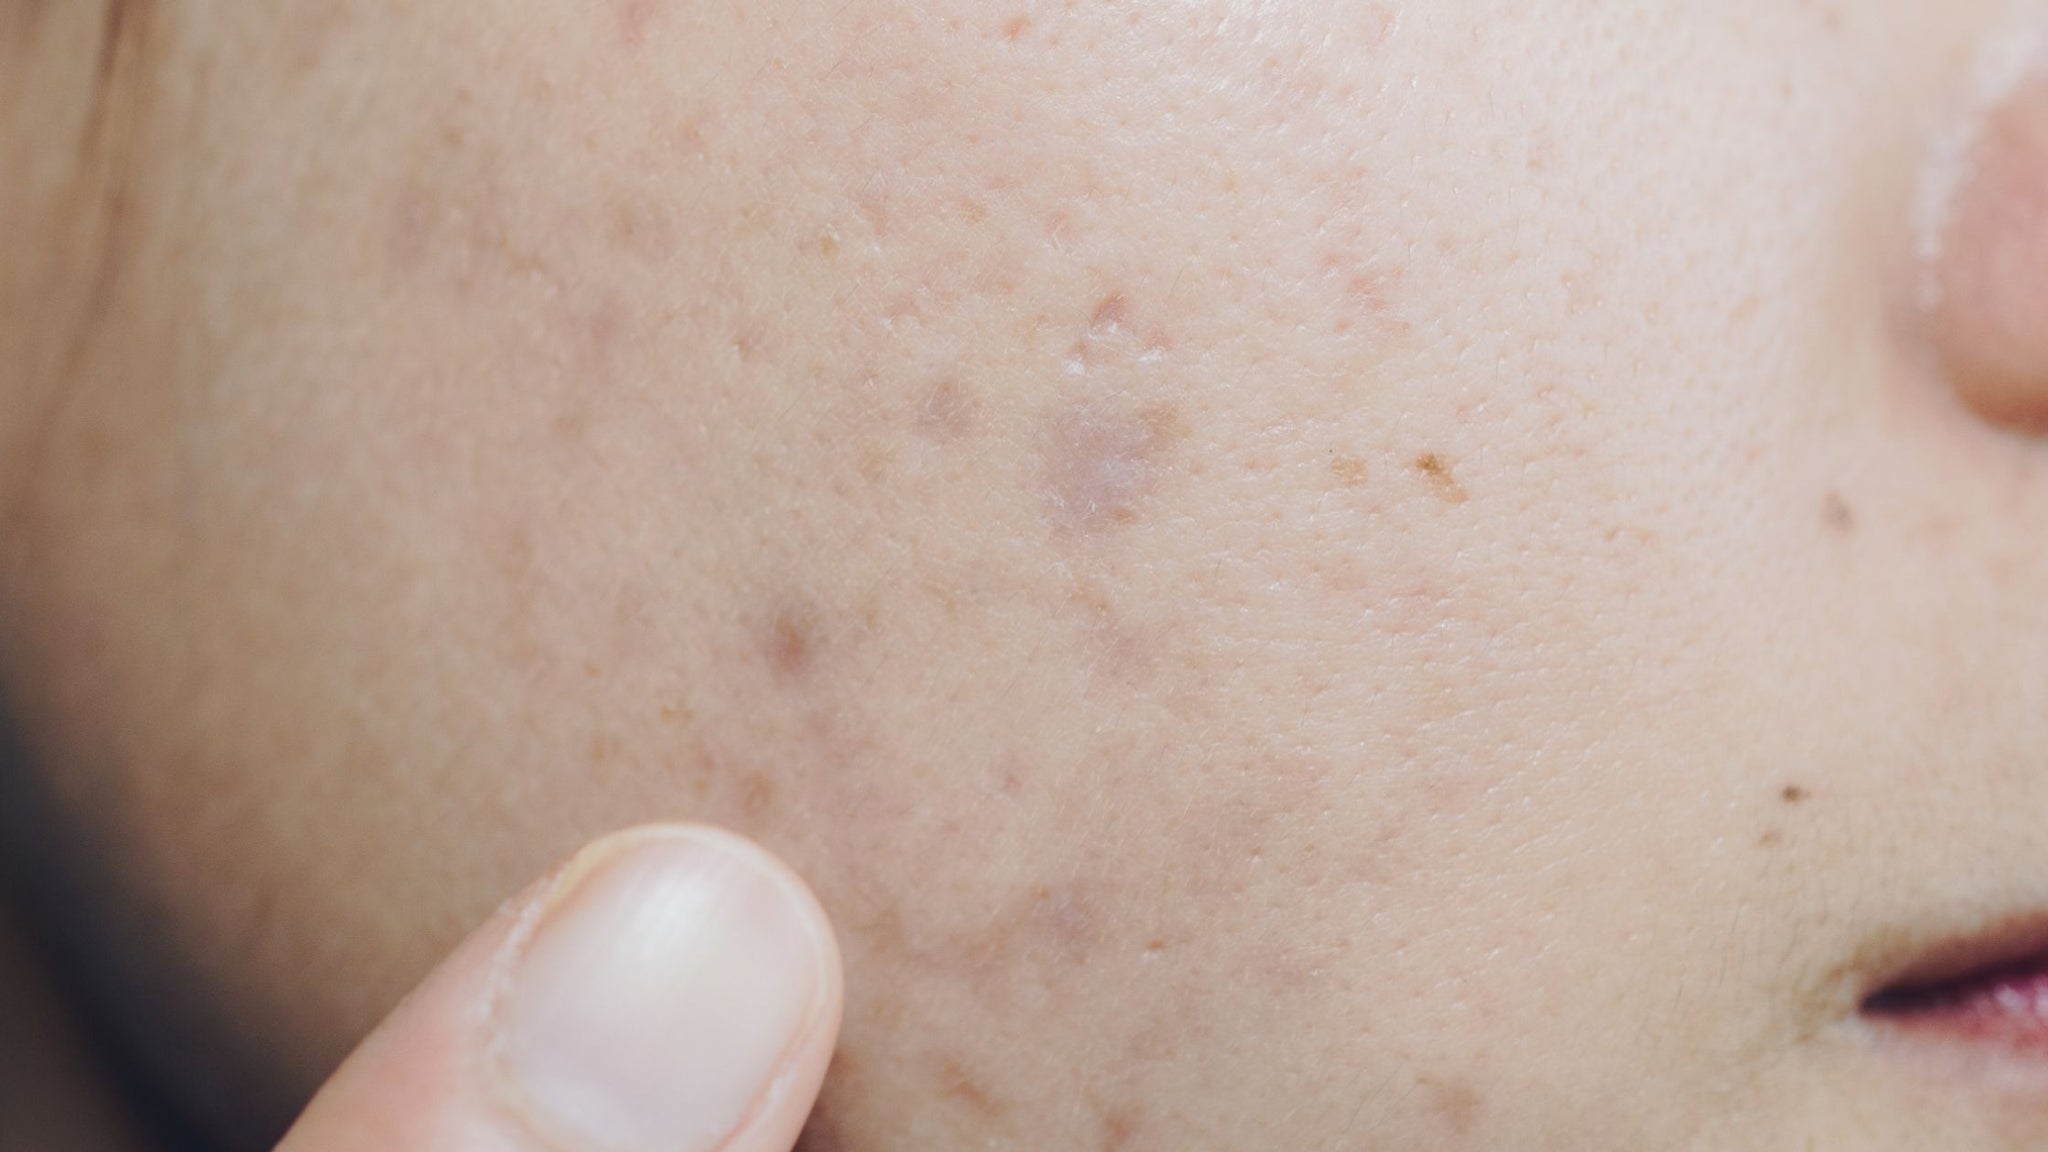 How to Get Rid of Acne - Scars As Recommended By Experts